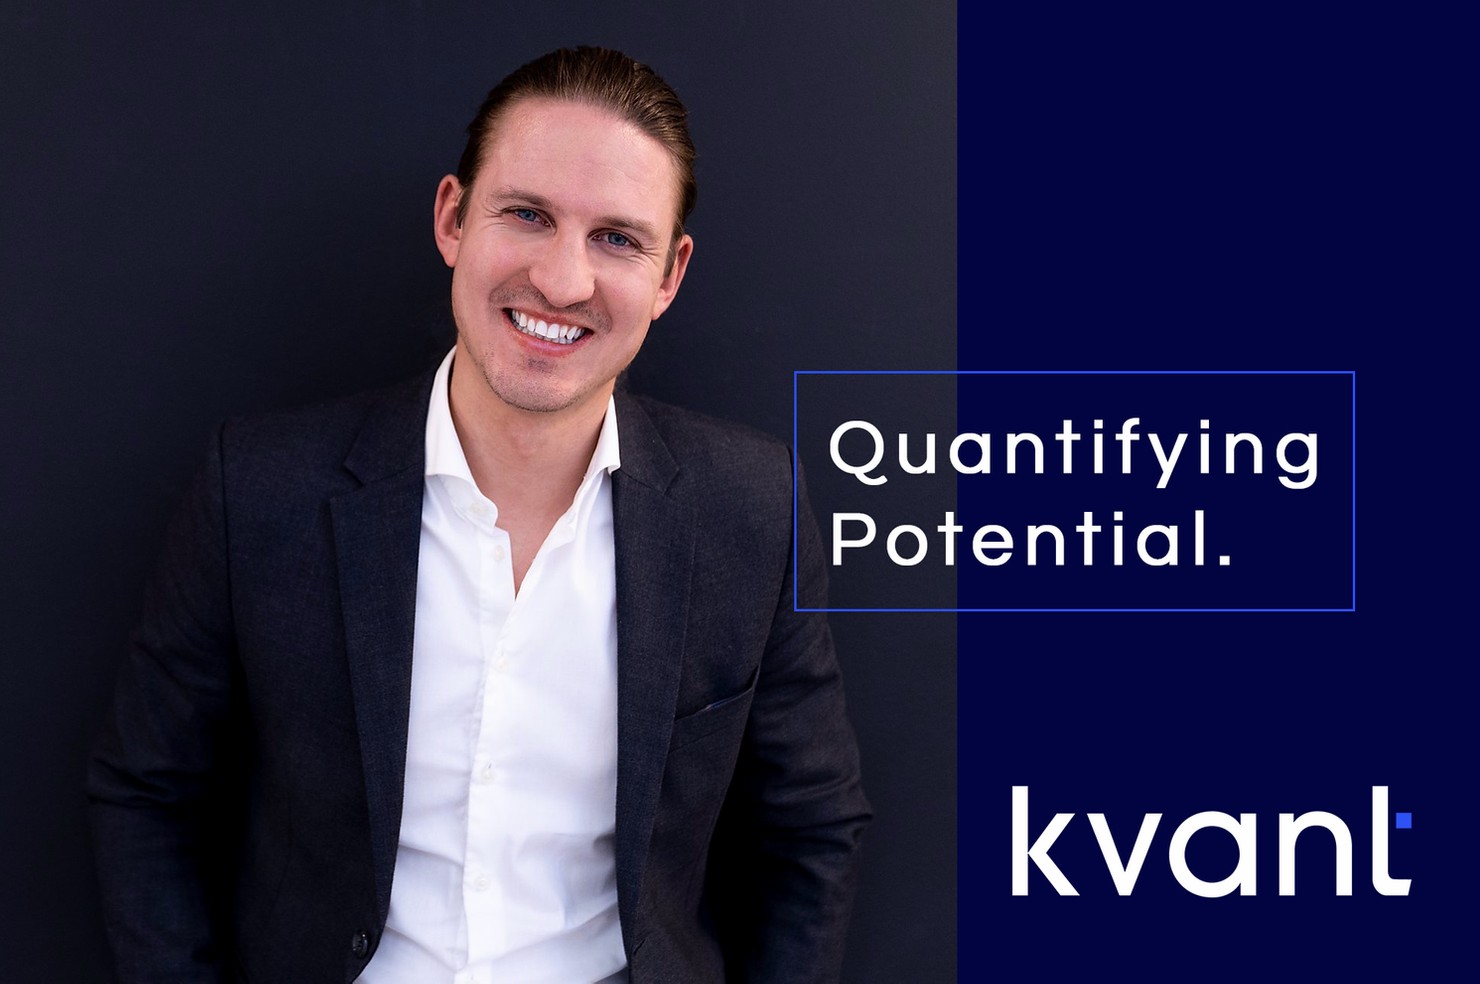 Ole Kristian Lohnaas is the CEO and co-founder of Kvant Consulting.